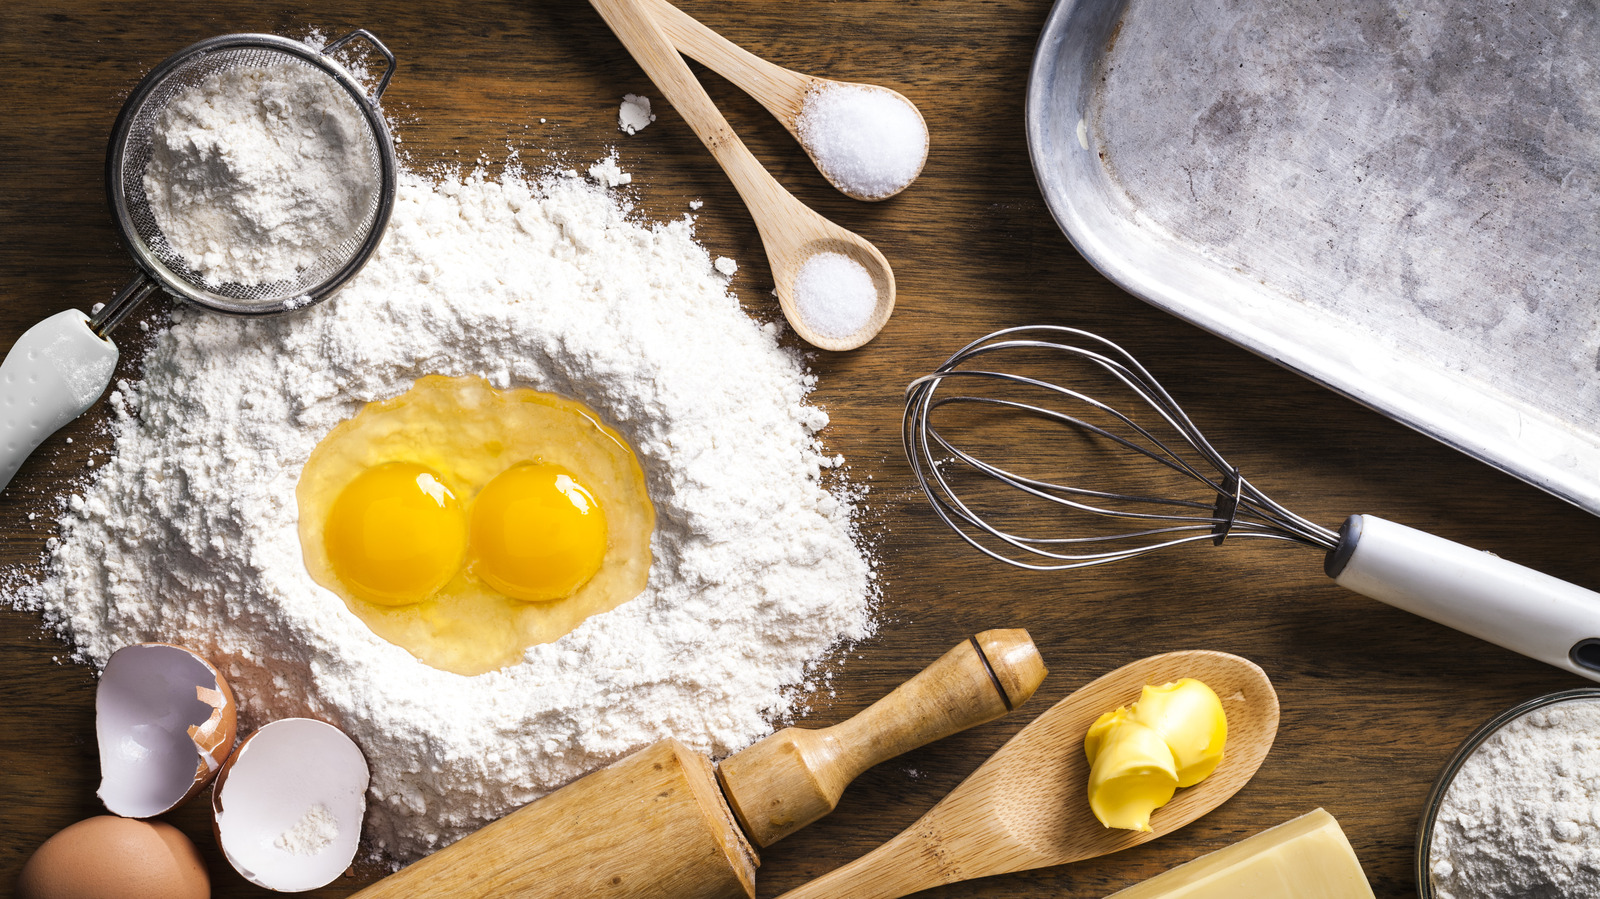 Why The Order In Which You Mix Baking Ingredients Is Important - Tasting Table